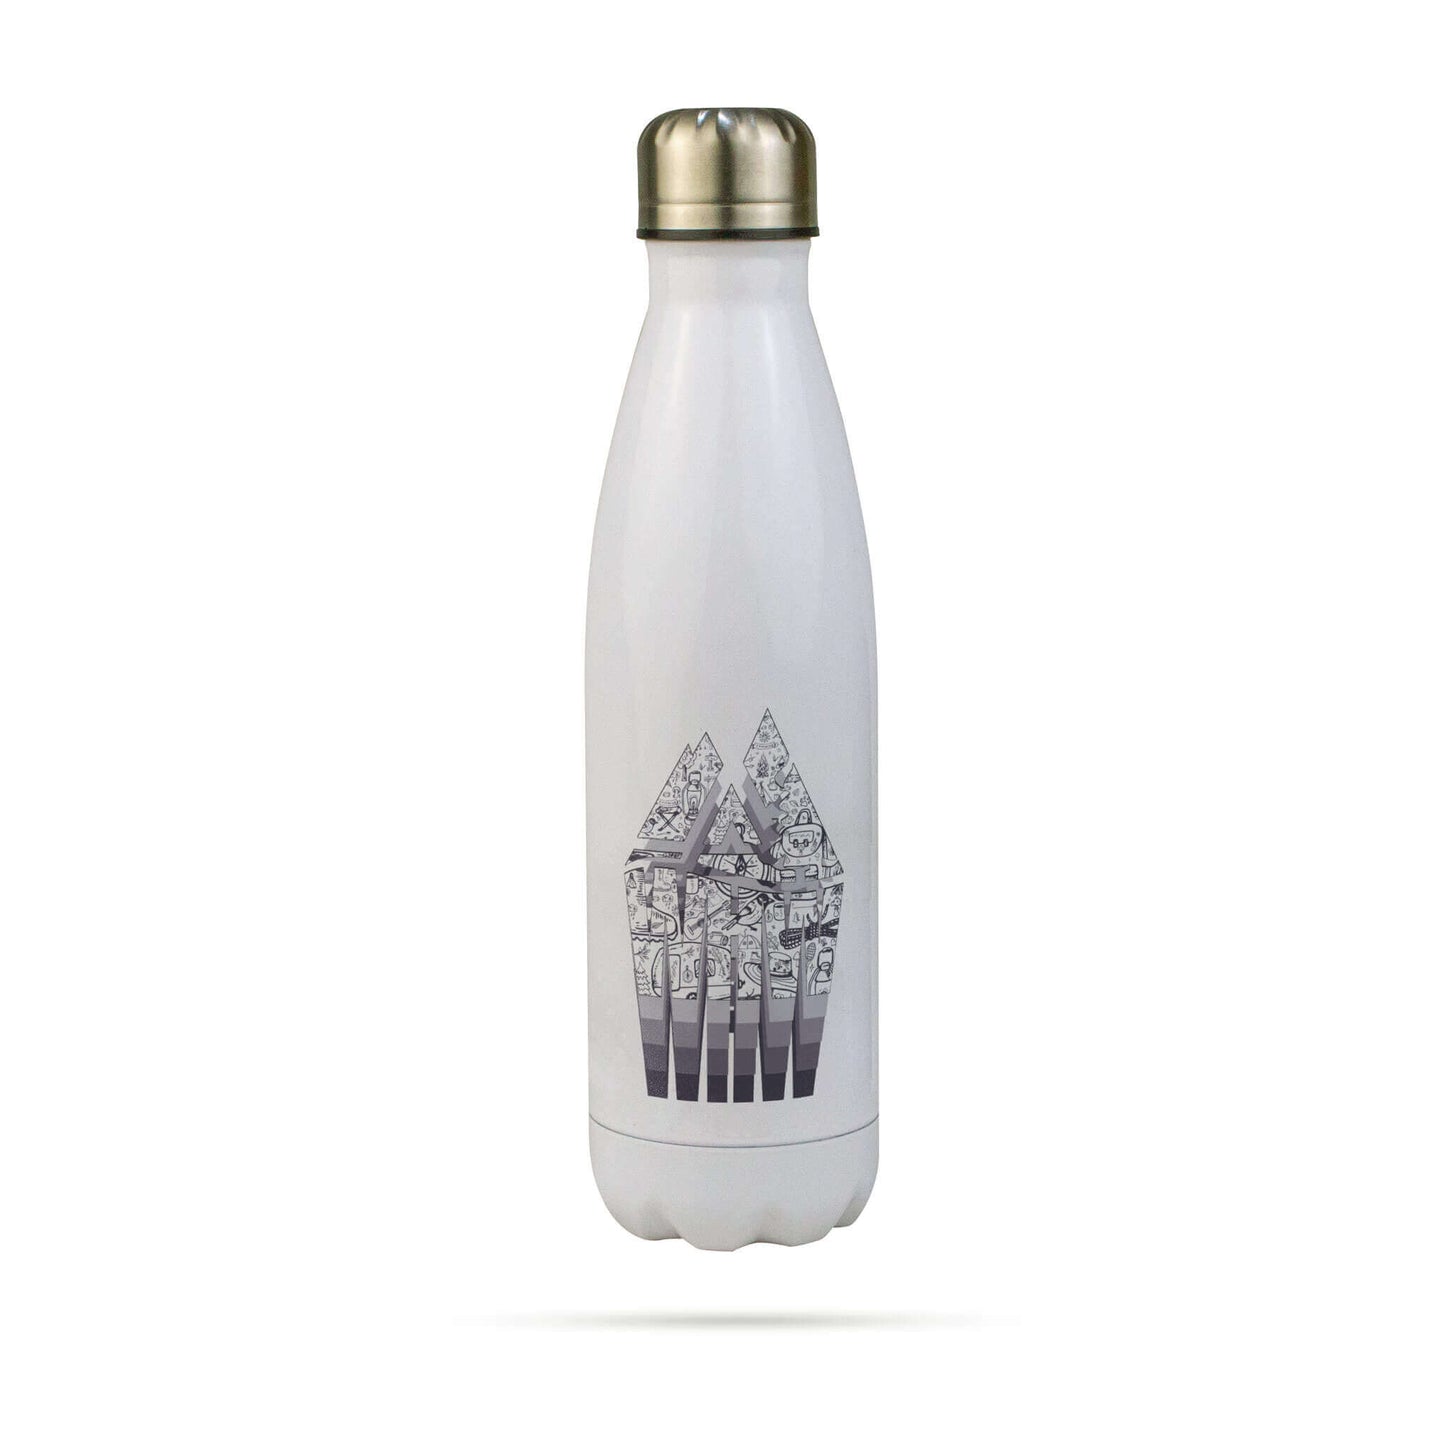 White West Highland way stainless steel water bottle with performance range graphic